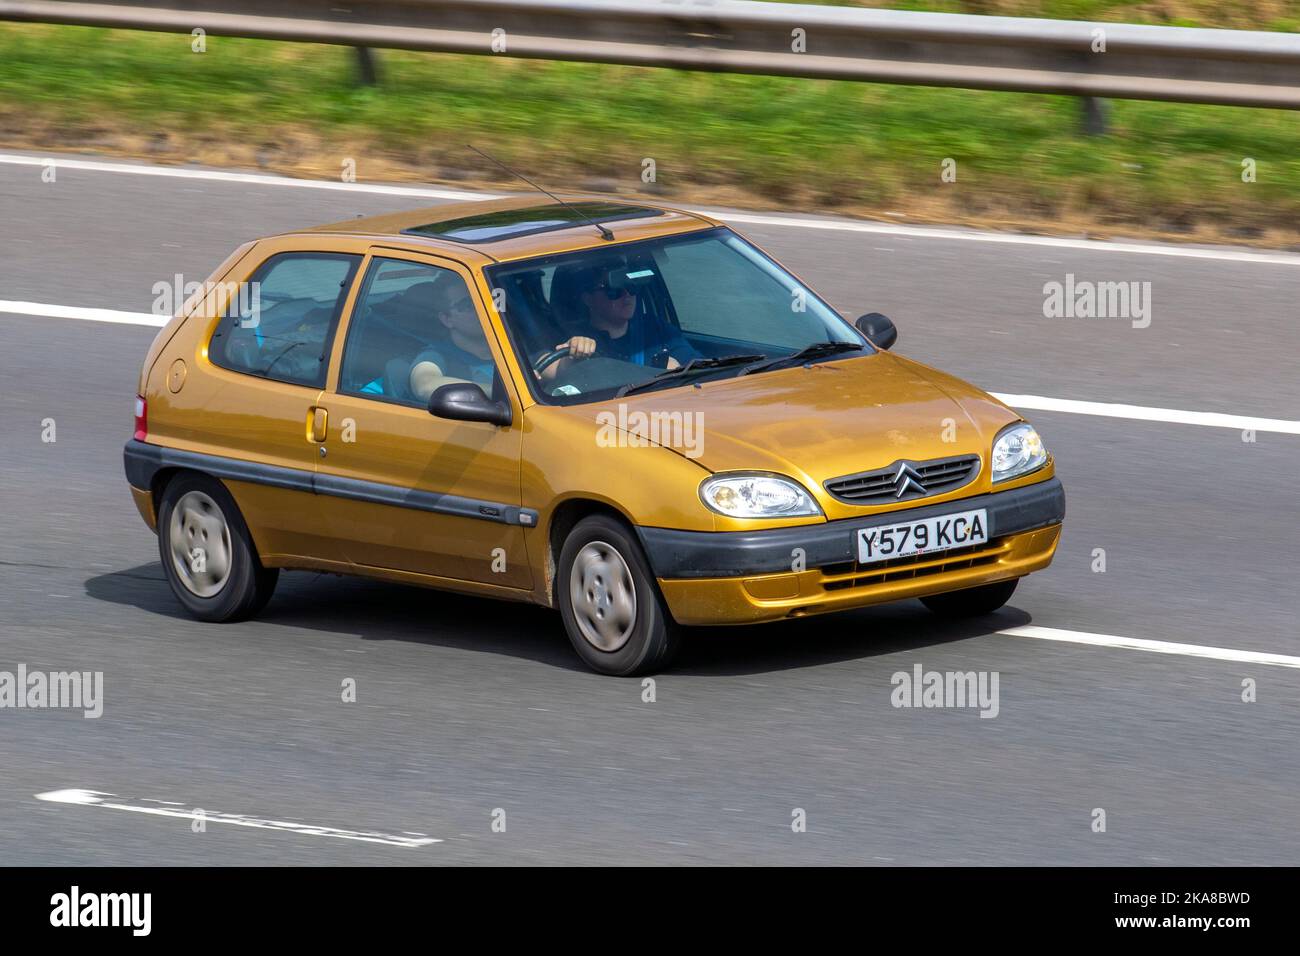 2001 Gold yellow CITROEN SAXO FIRST 1124cc Petrol 5 speed manual, sold in Japan as the Citroën Chanson, travelling on the M6 motorway, UK Stock Photo